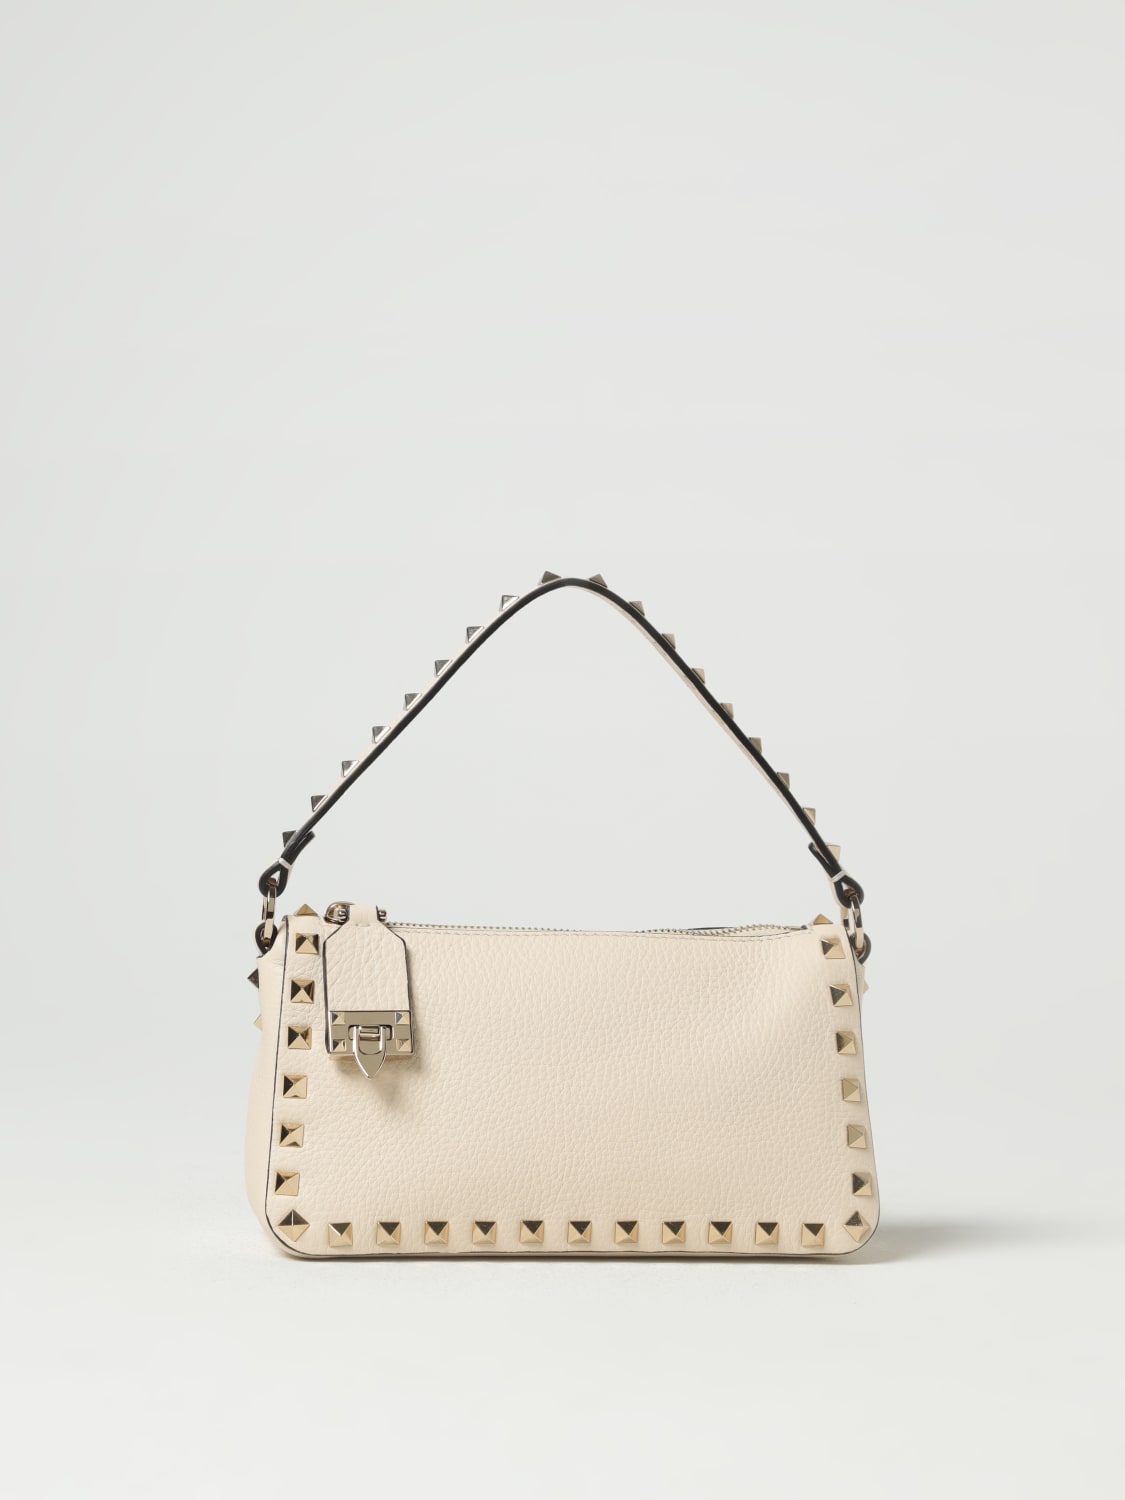 Valentino Outlet Sale: Cheap Valentino Garavani Bags, Clothes, Shoes,  Accessories, Jewelry Online Store